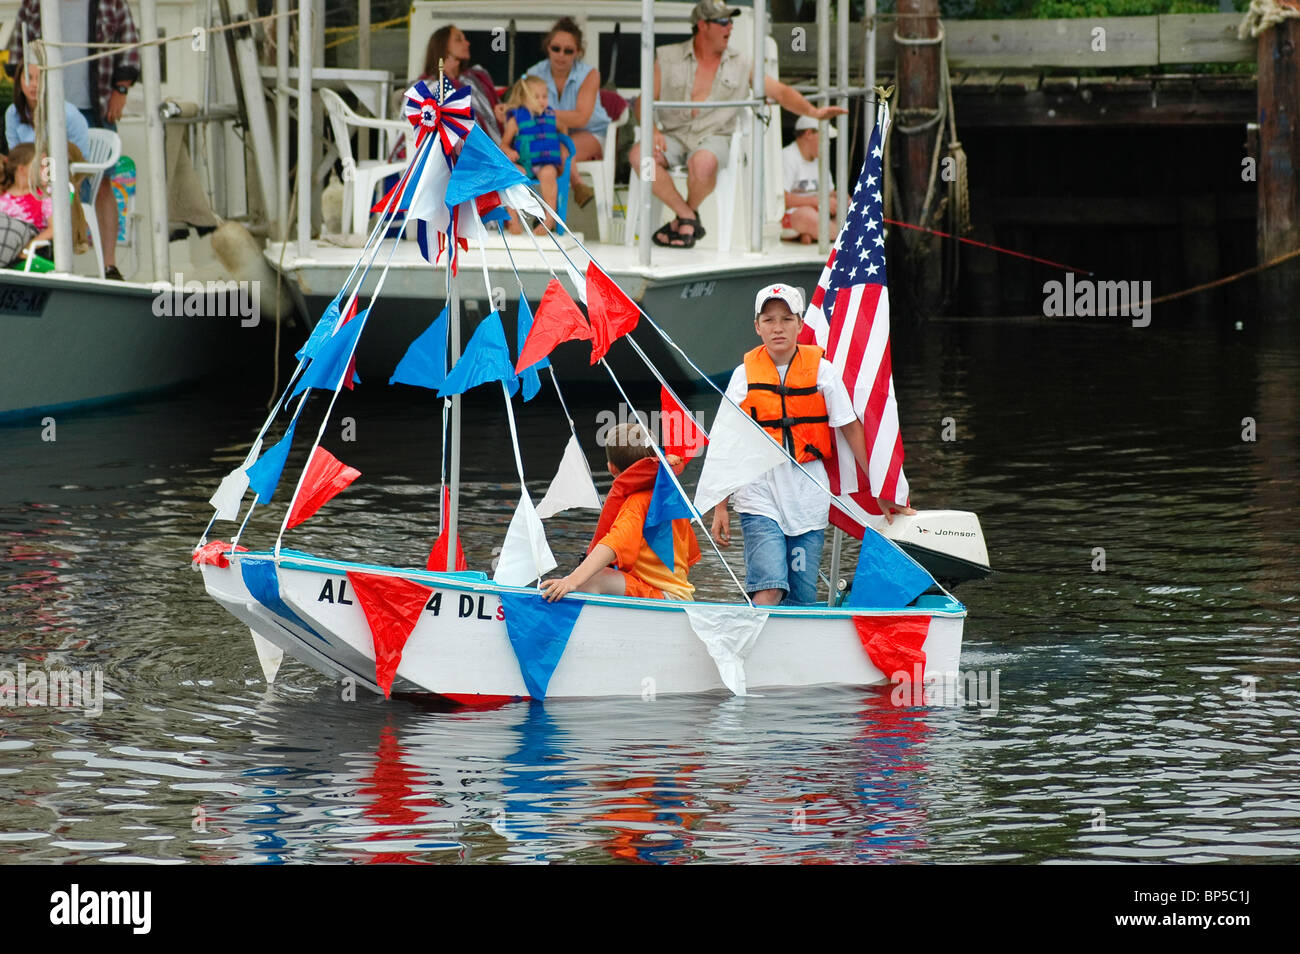 annual Blessing of The Fleet at Bayou La Batre Alabama of 'Forrest Gump' fame Stock Photo